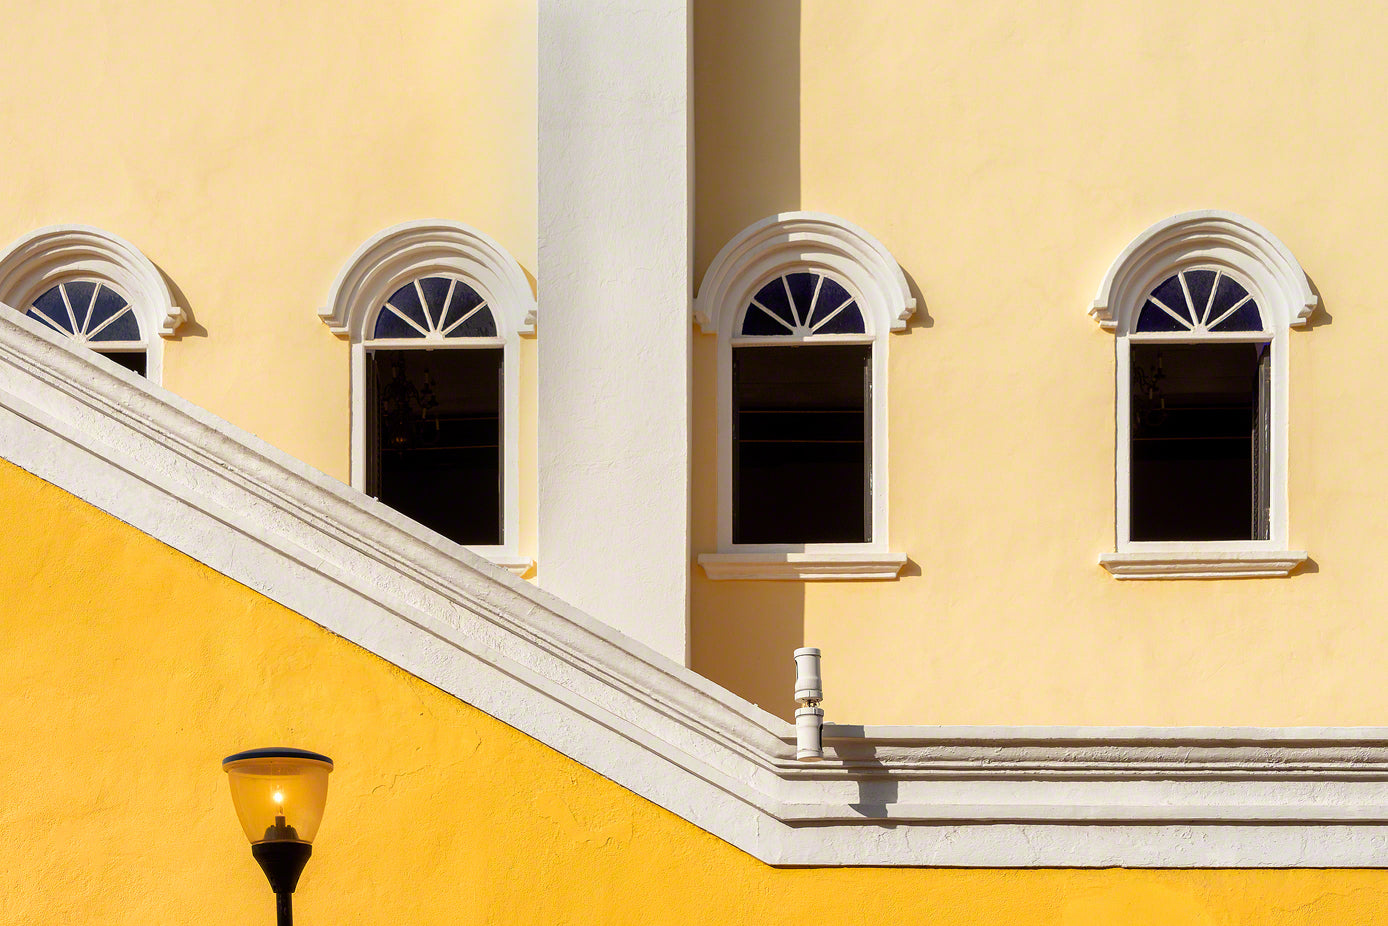 A photo of the colorful Dutch architecture in Curacao